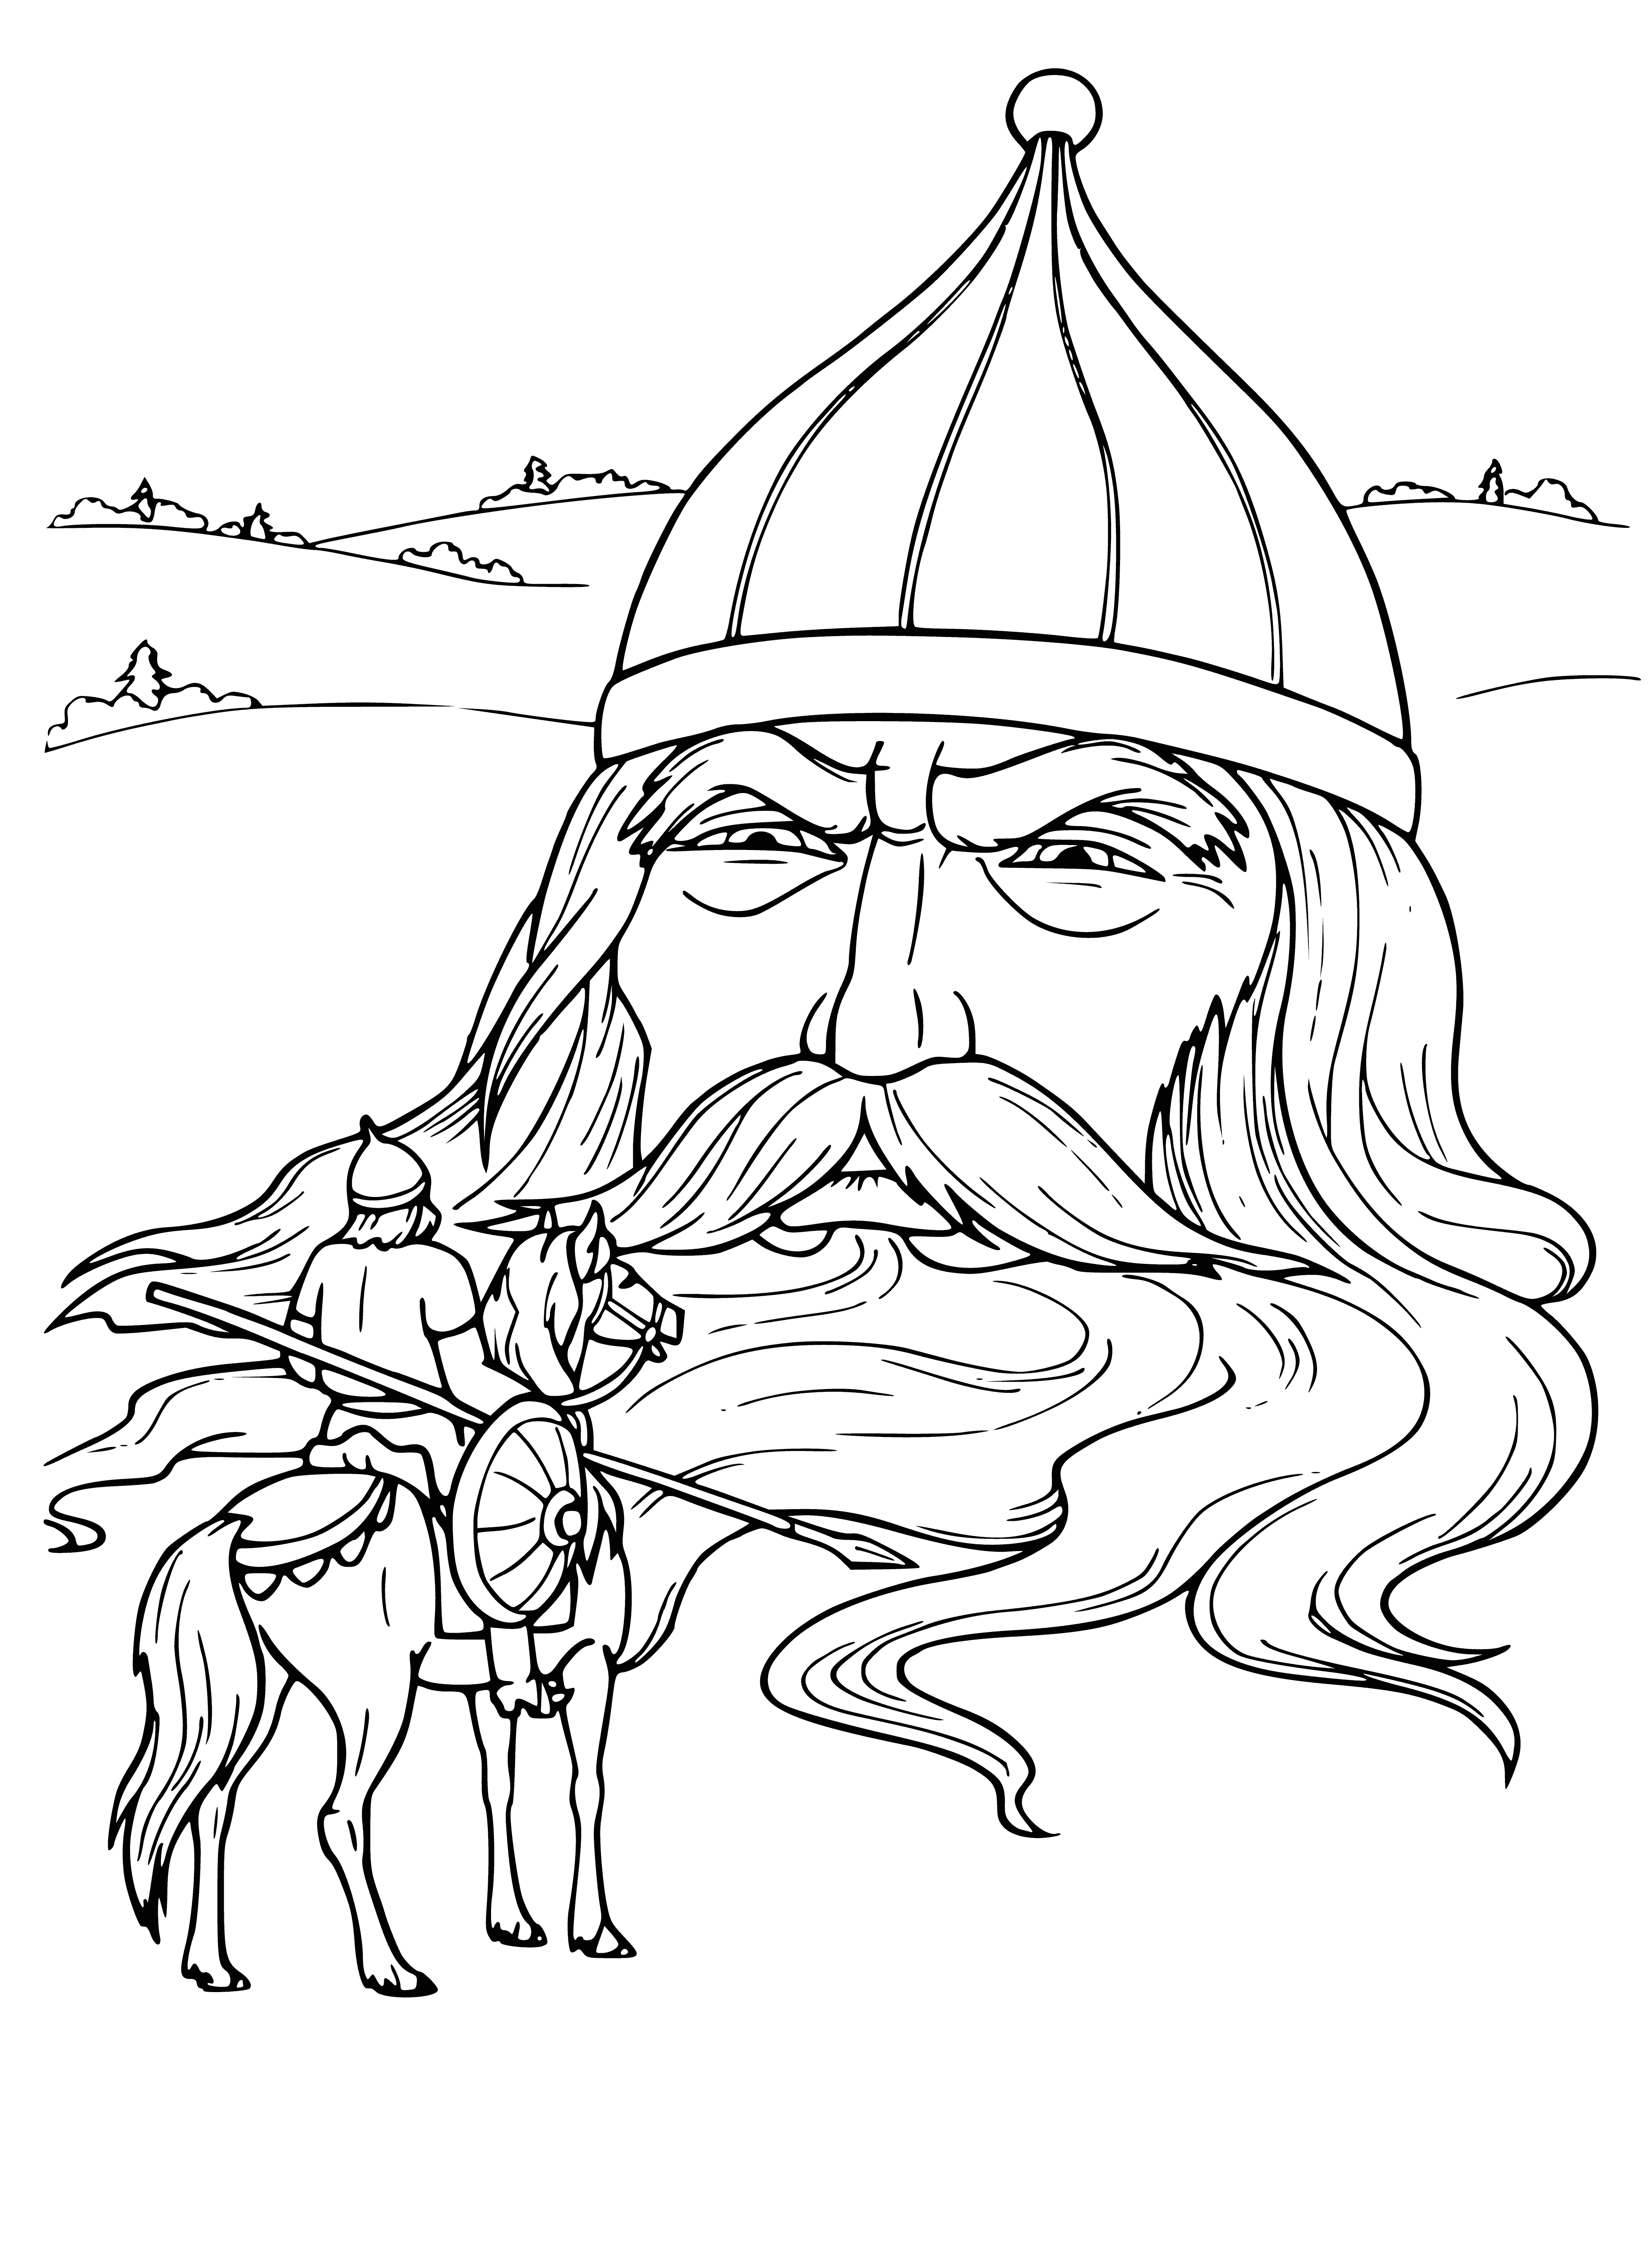 coloring page: Man with serious expression wearing white shirt & black jacket, looking left, with dark hair, light skin & beard.